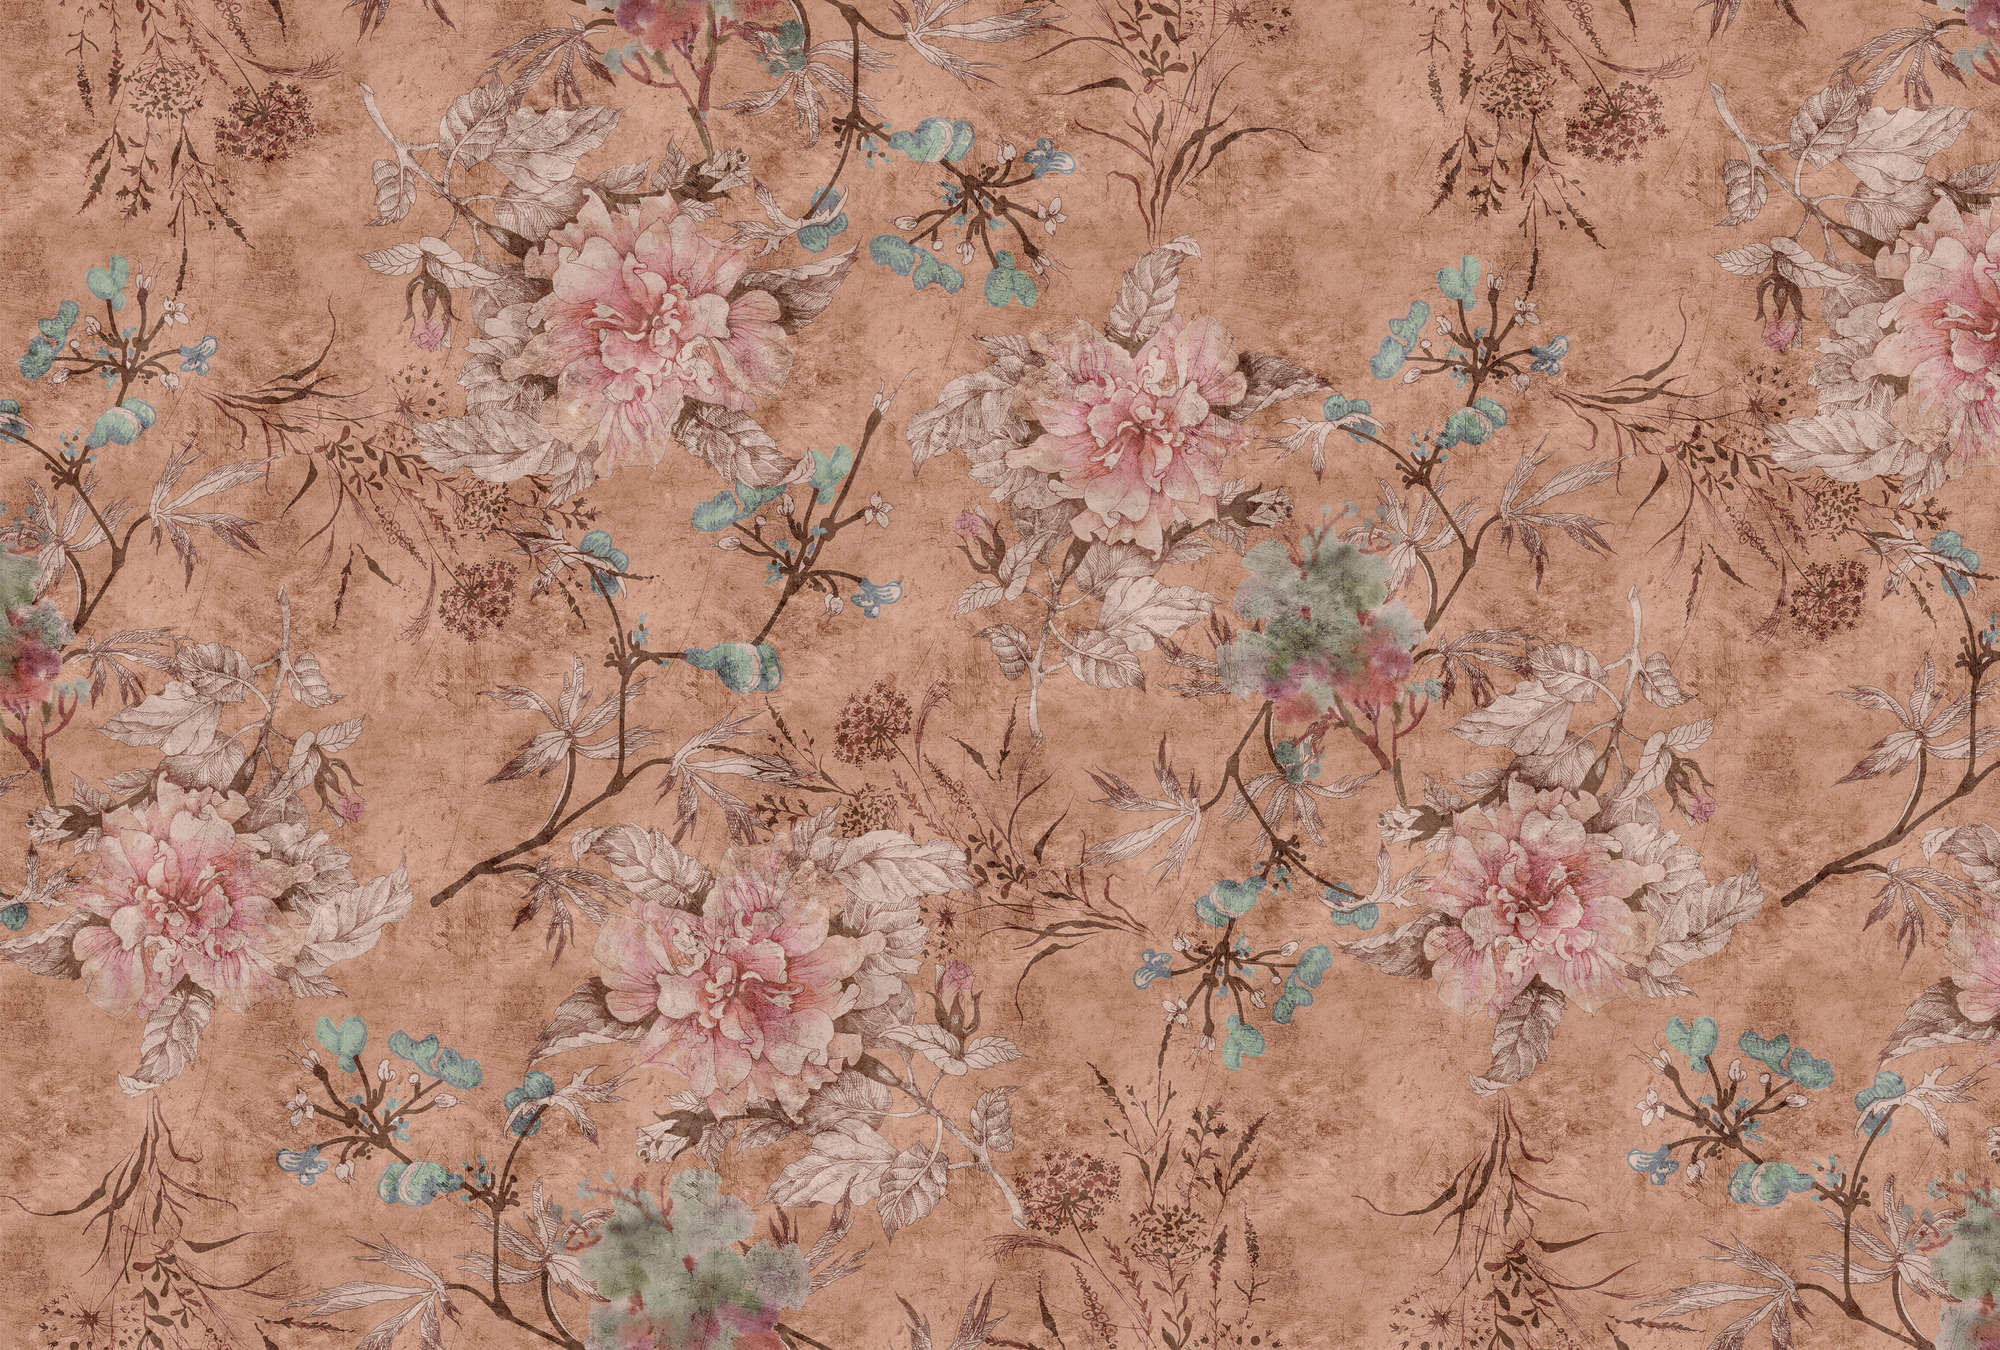             Tenderblossom 3 - vintage style floral pattern digital print wallpaper - pink, red | texture non-woven
        